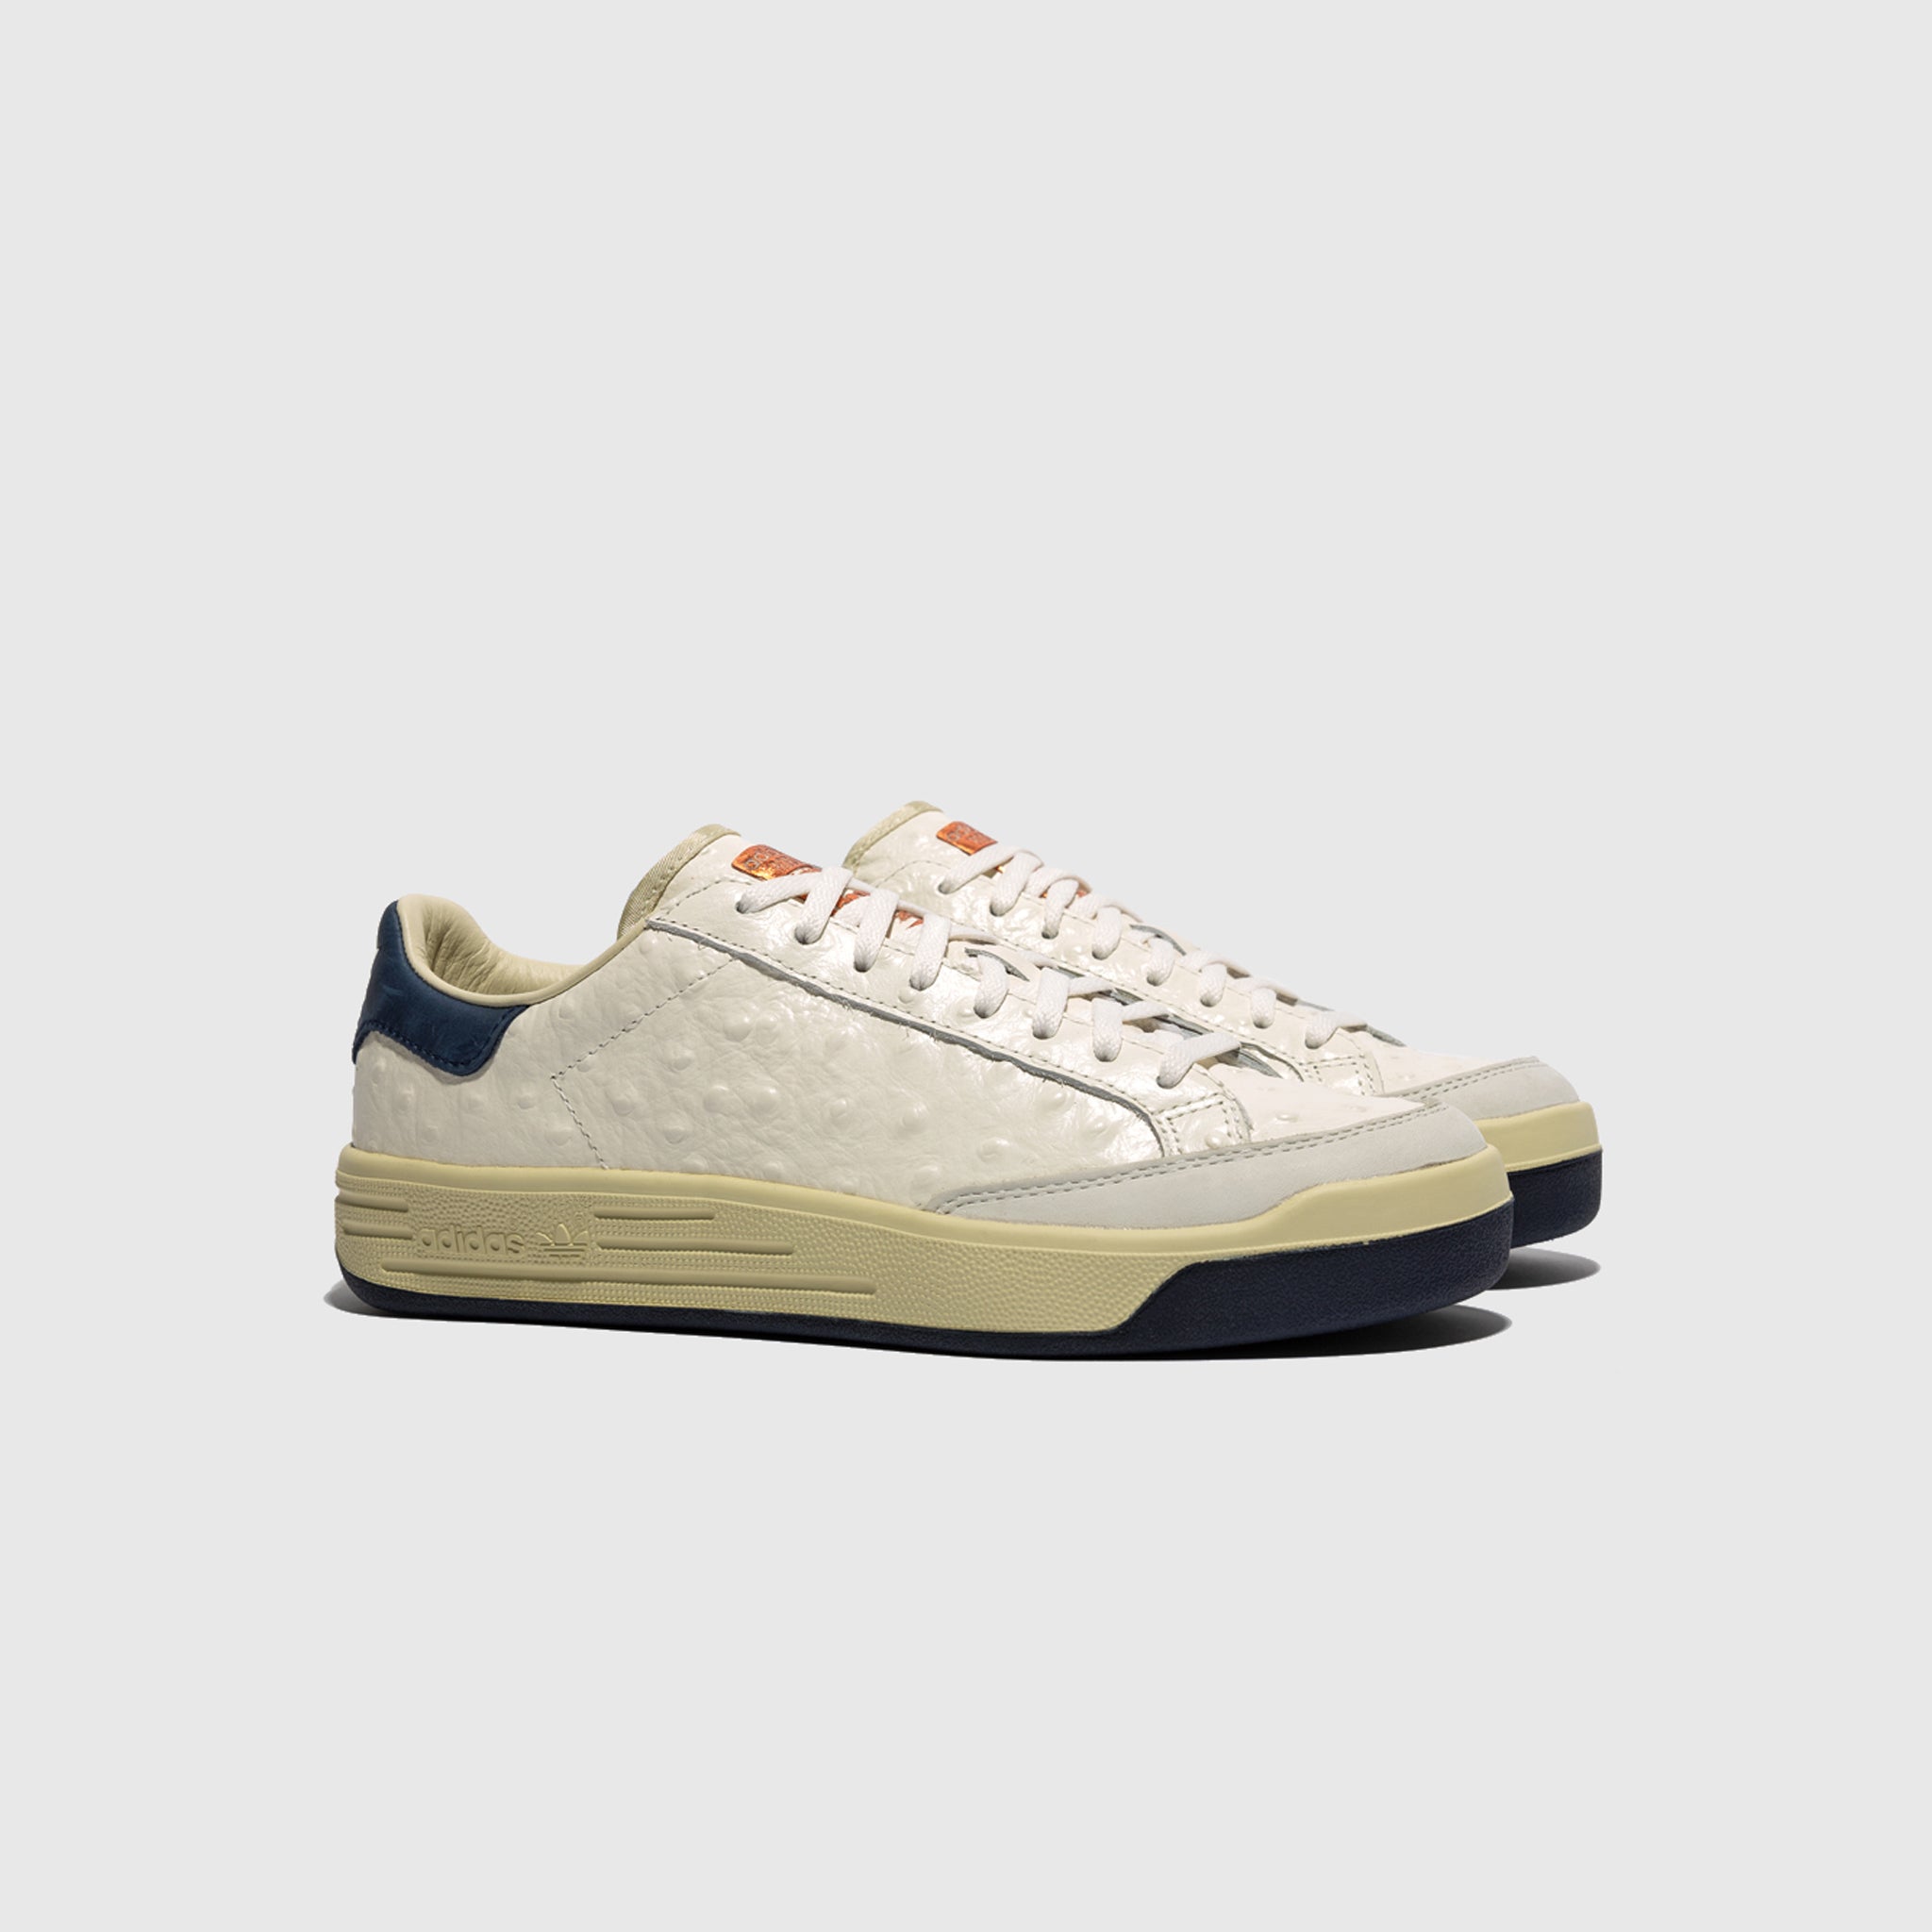 ROD LAVER "LEATHER PACK" (OSTRICH)